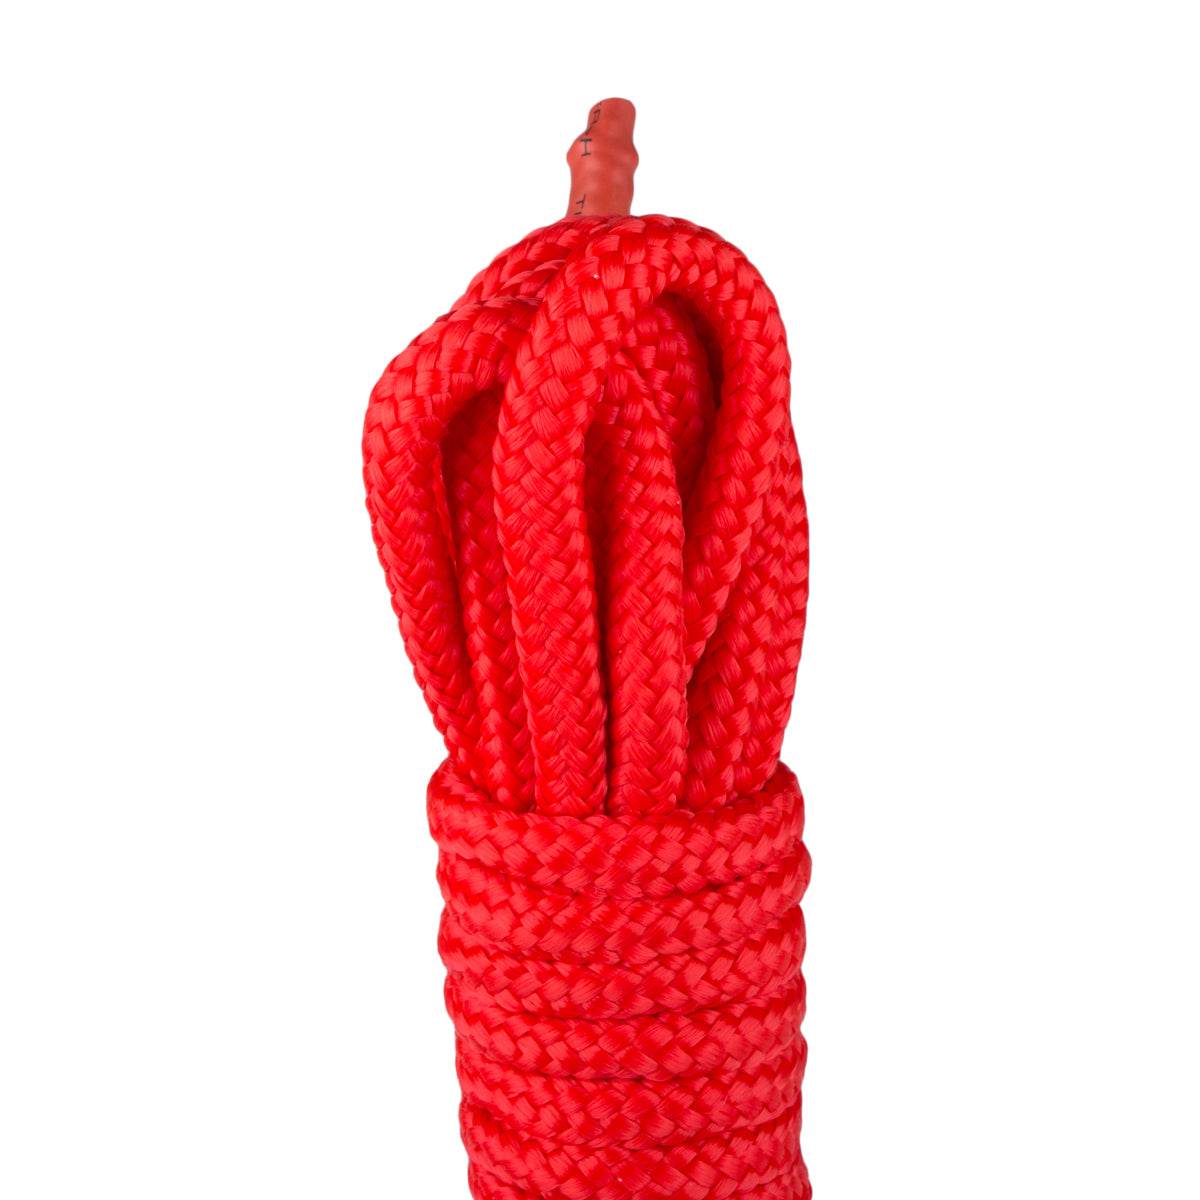 Bondage Rope 10m Red - Just for you desires